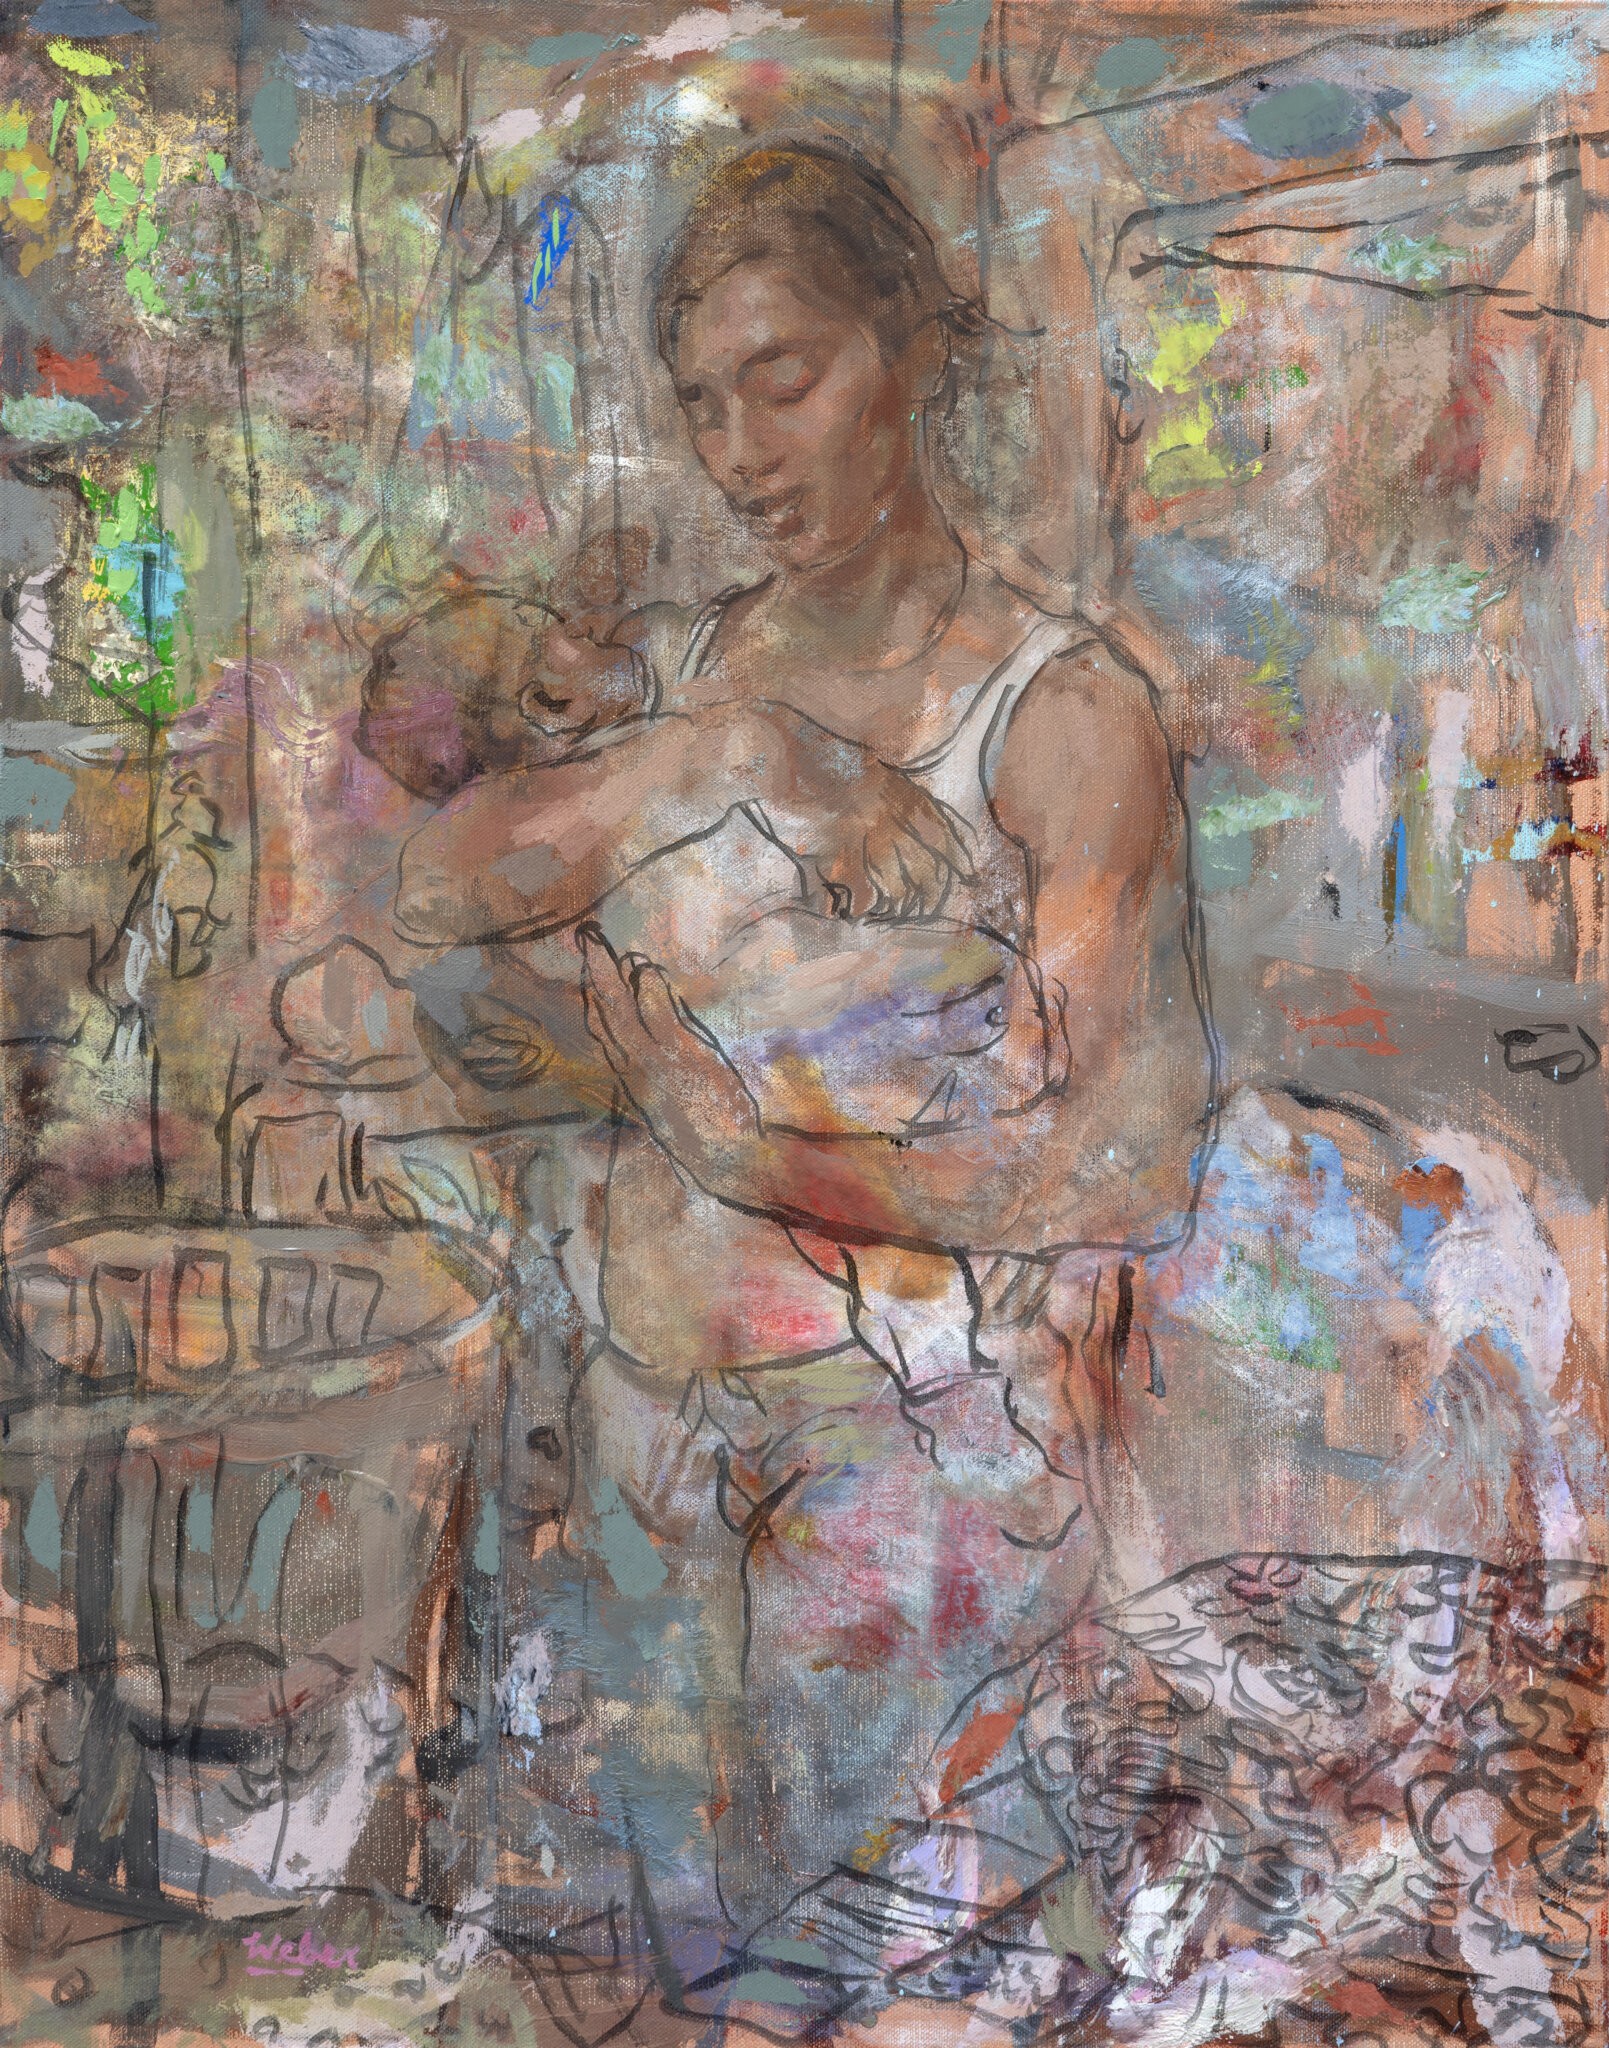 "Mother and Child" by Nick Weber